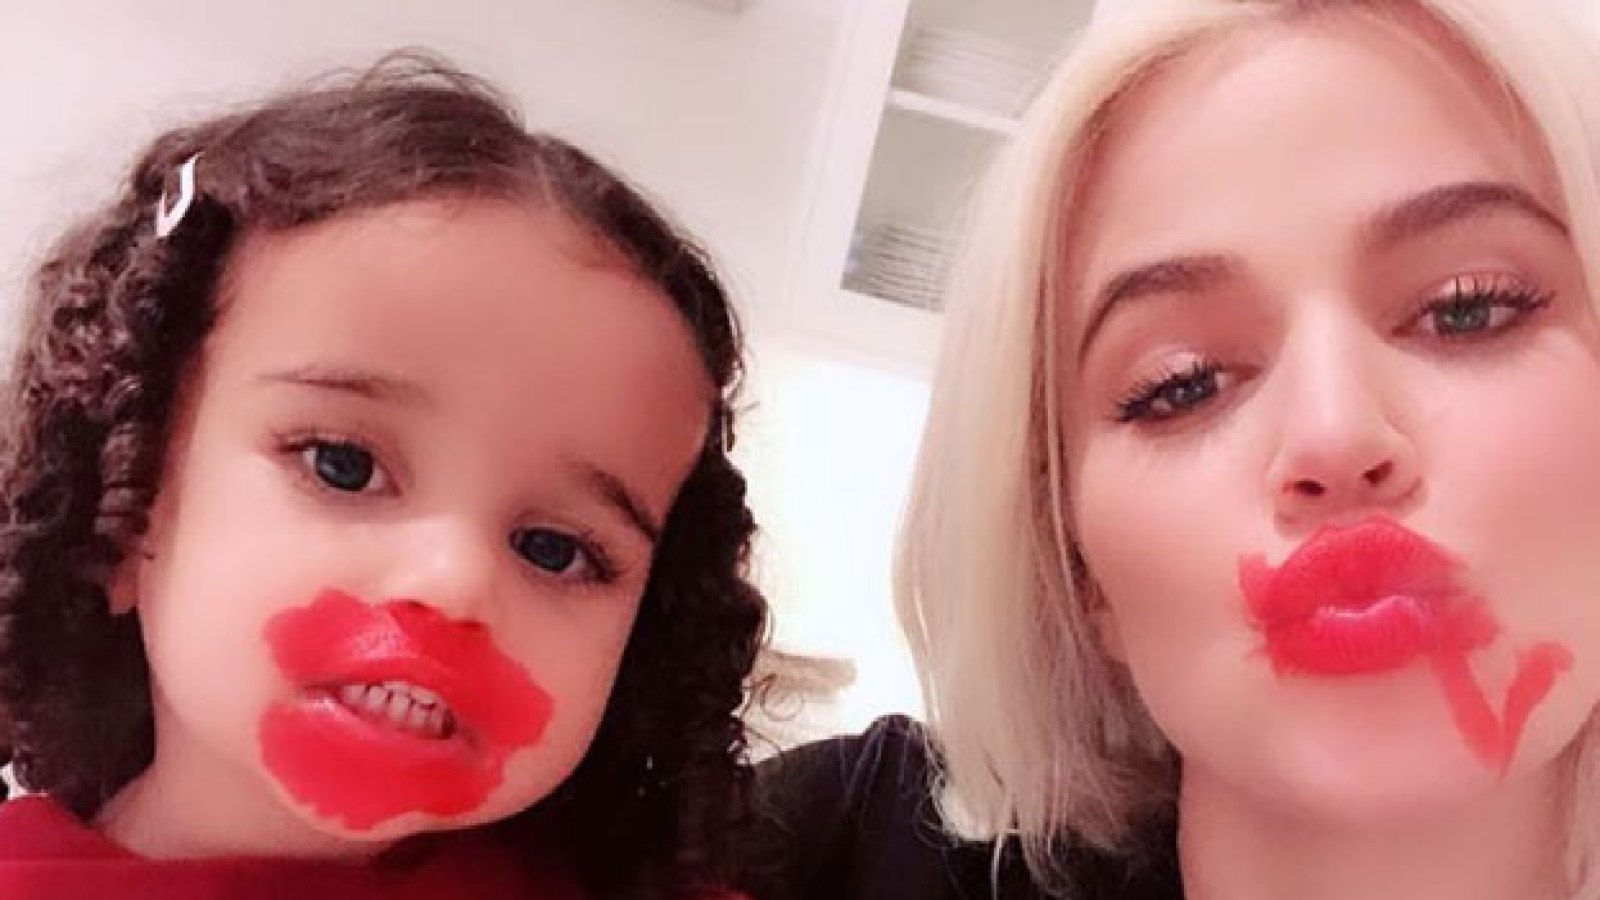 Dream Renee Khloe Kardashian’s New Makeup Artist Is Pint-Sized and Adorable